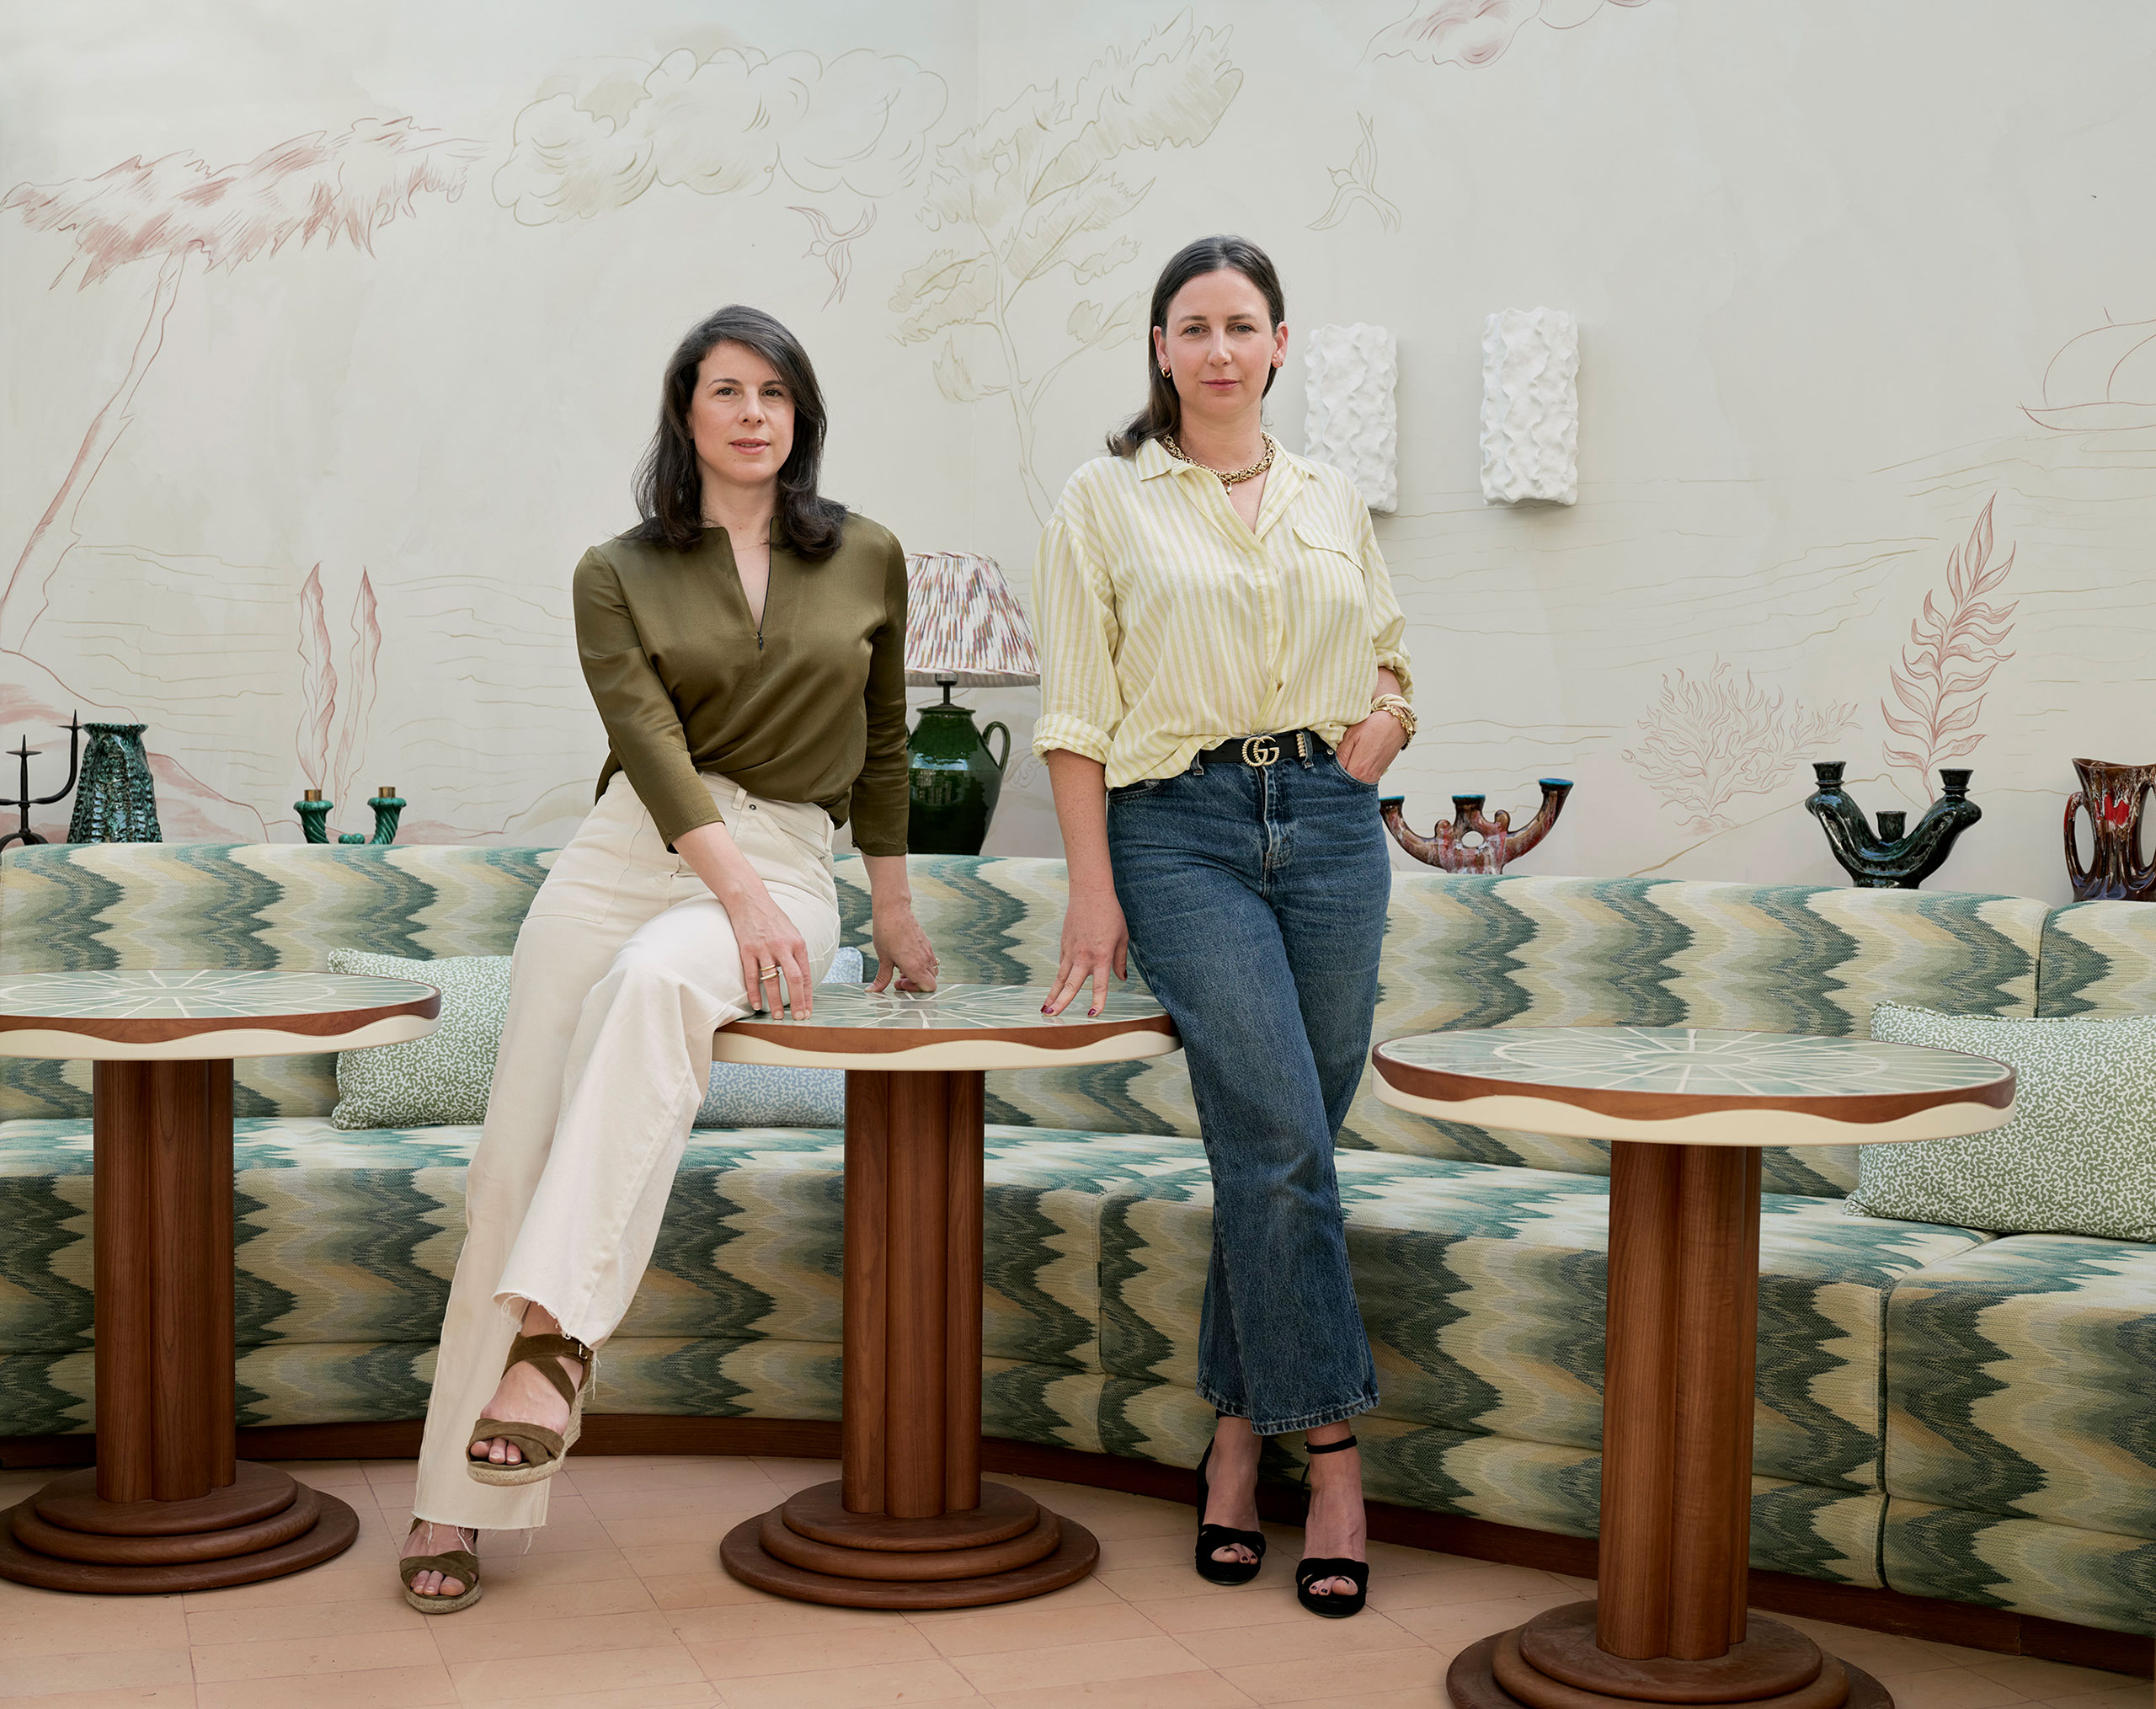 Interior designers Virginie Friedmann (right) and Delphine Versace. Photography by Christophe Coenon.